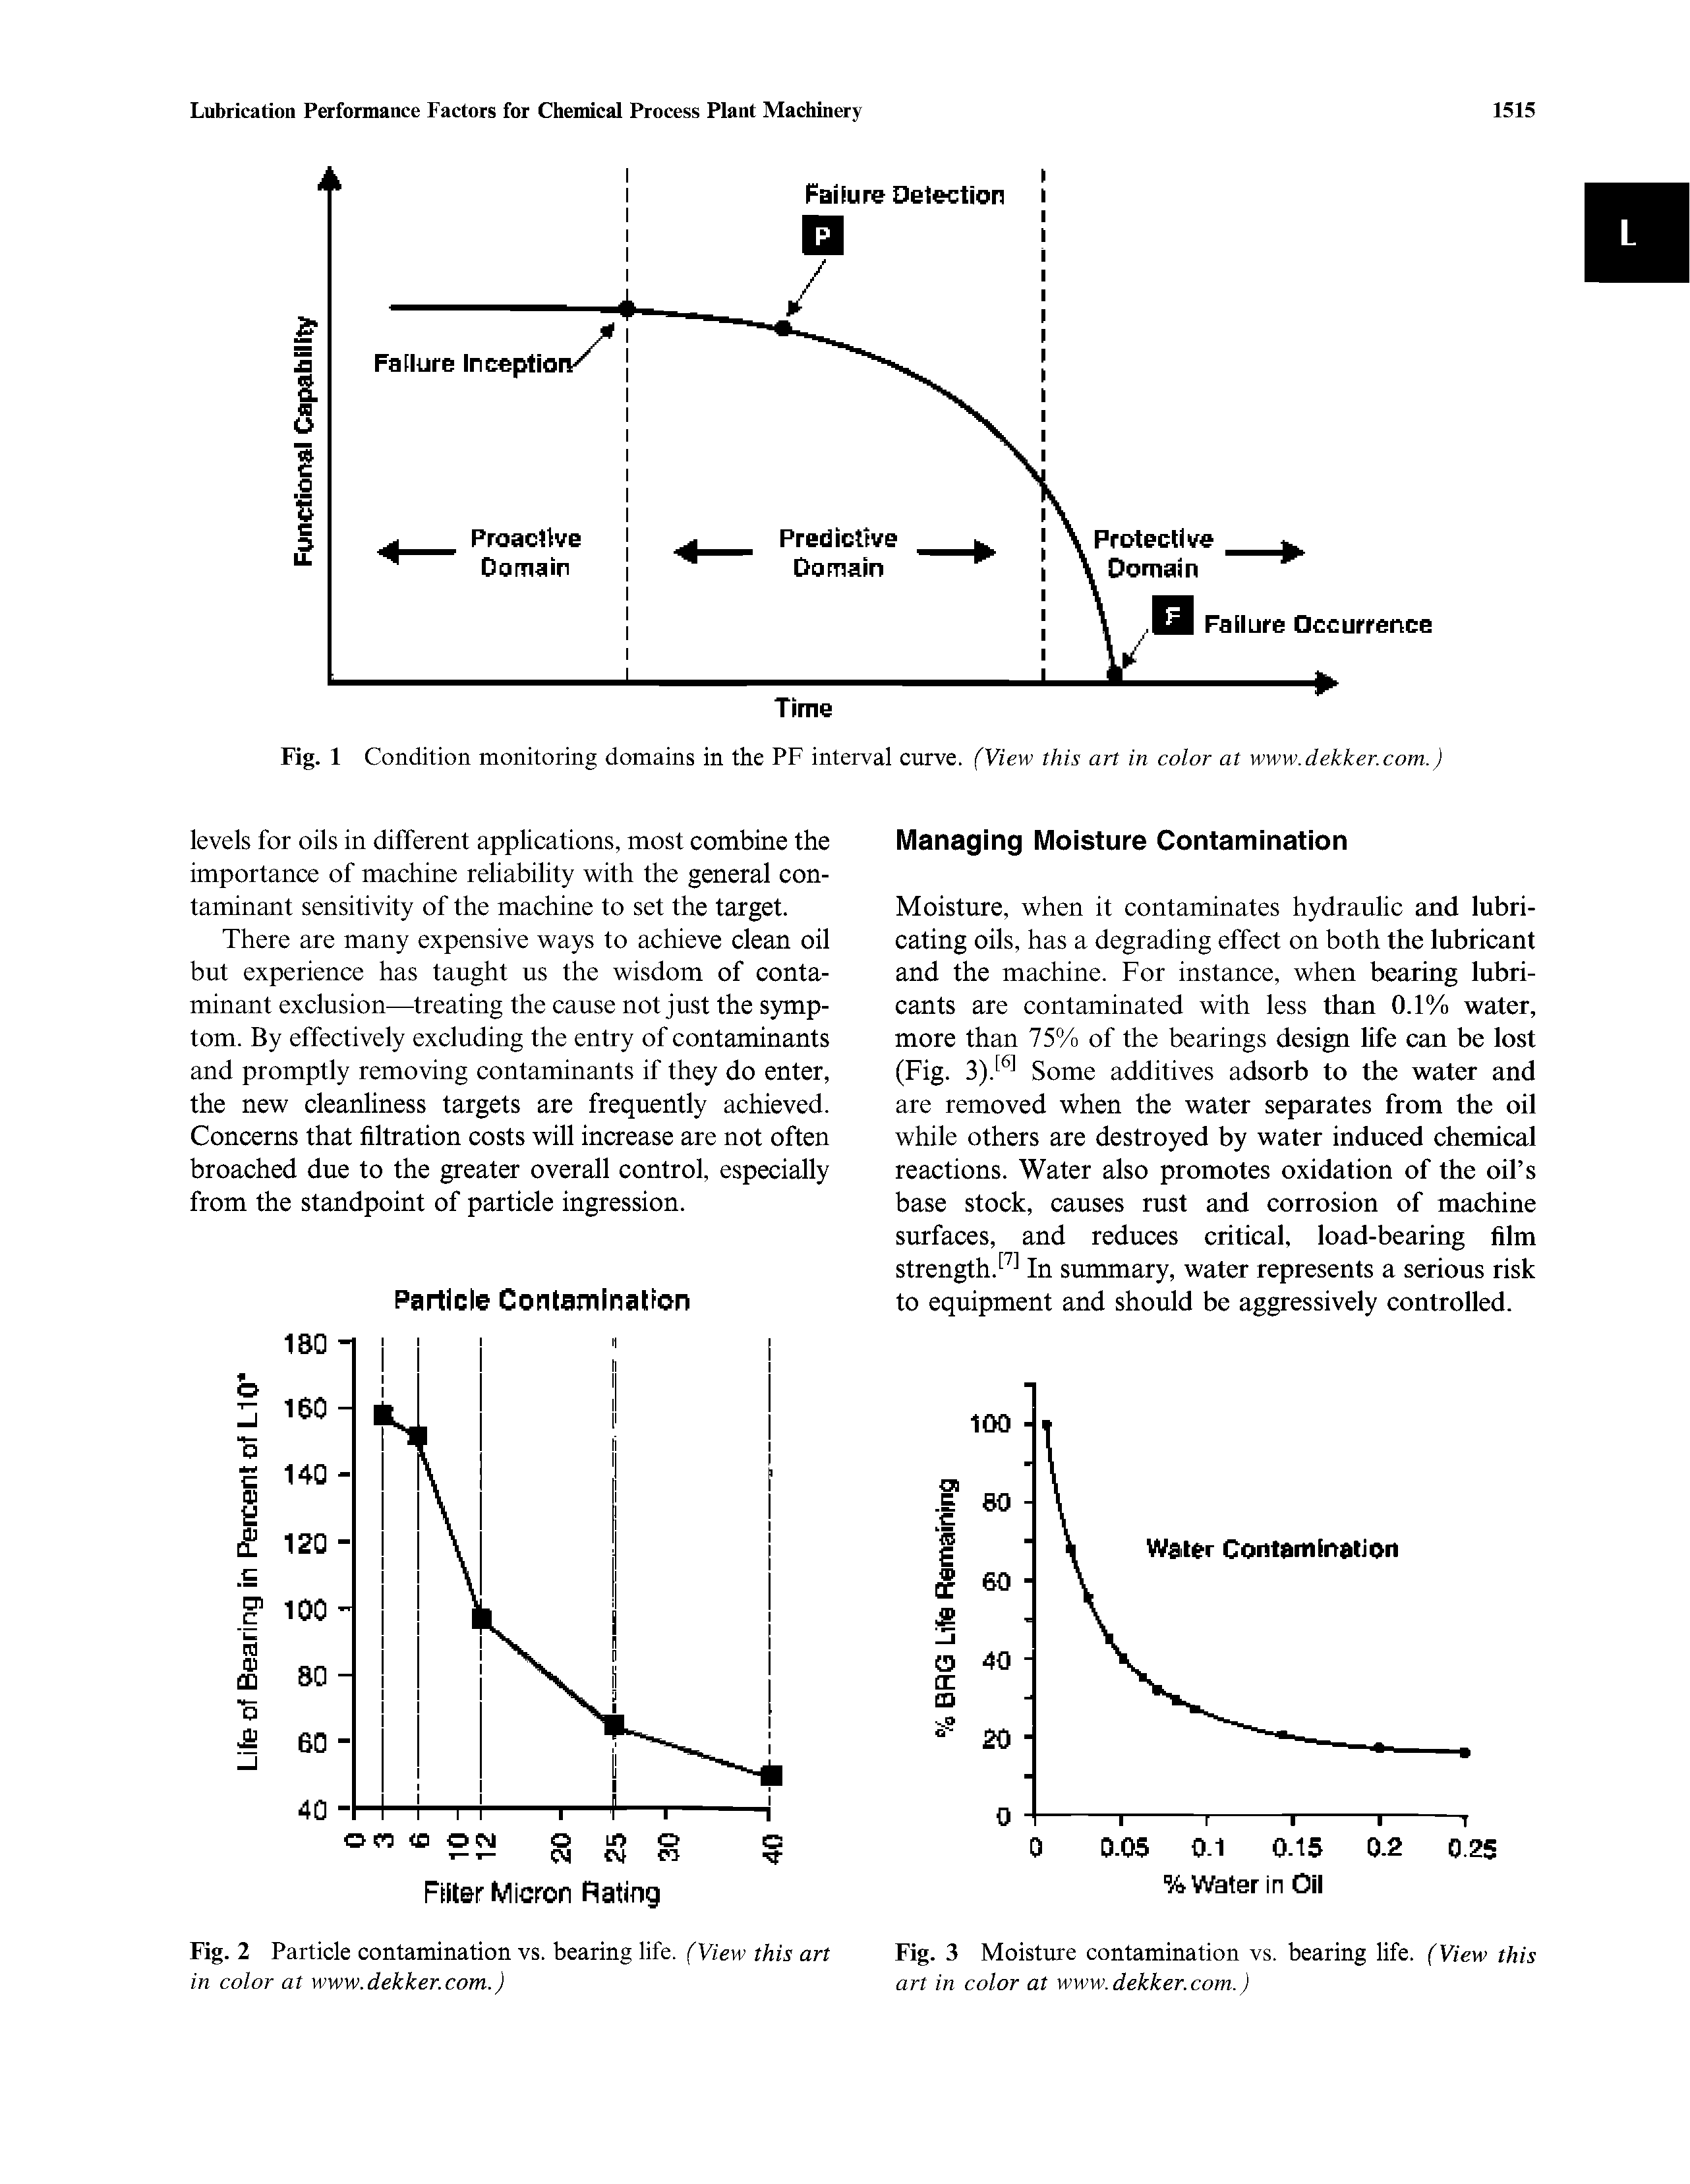 Fig. 2 Particle contamination vs. bearing life. (View this art in color at www.dekker.com.)...